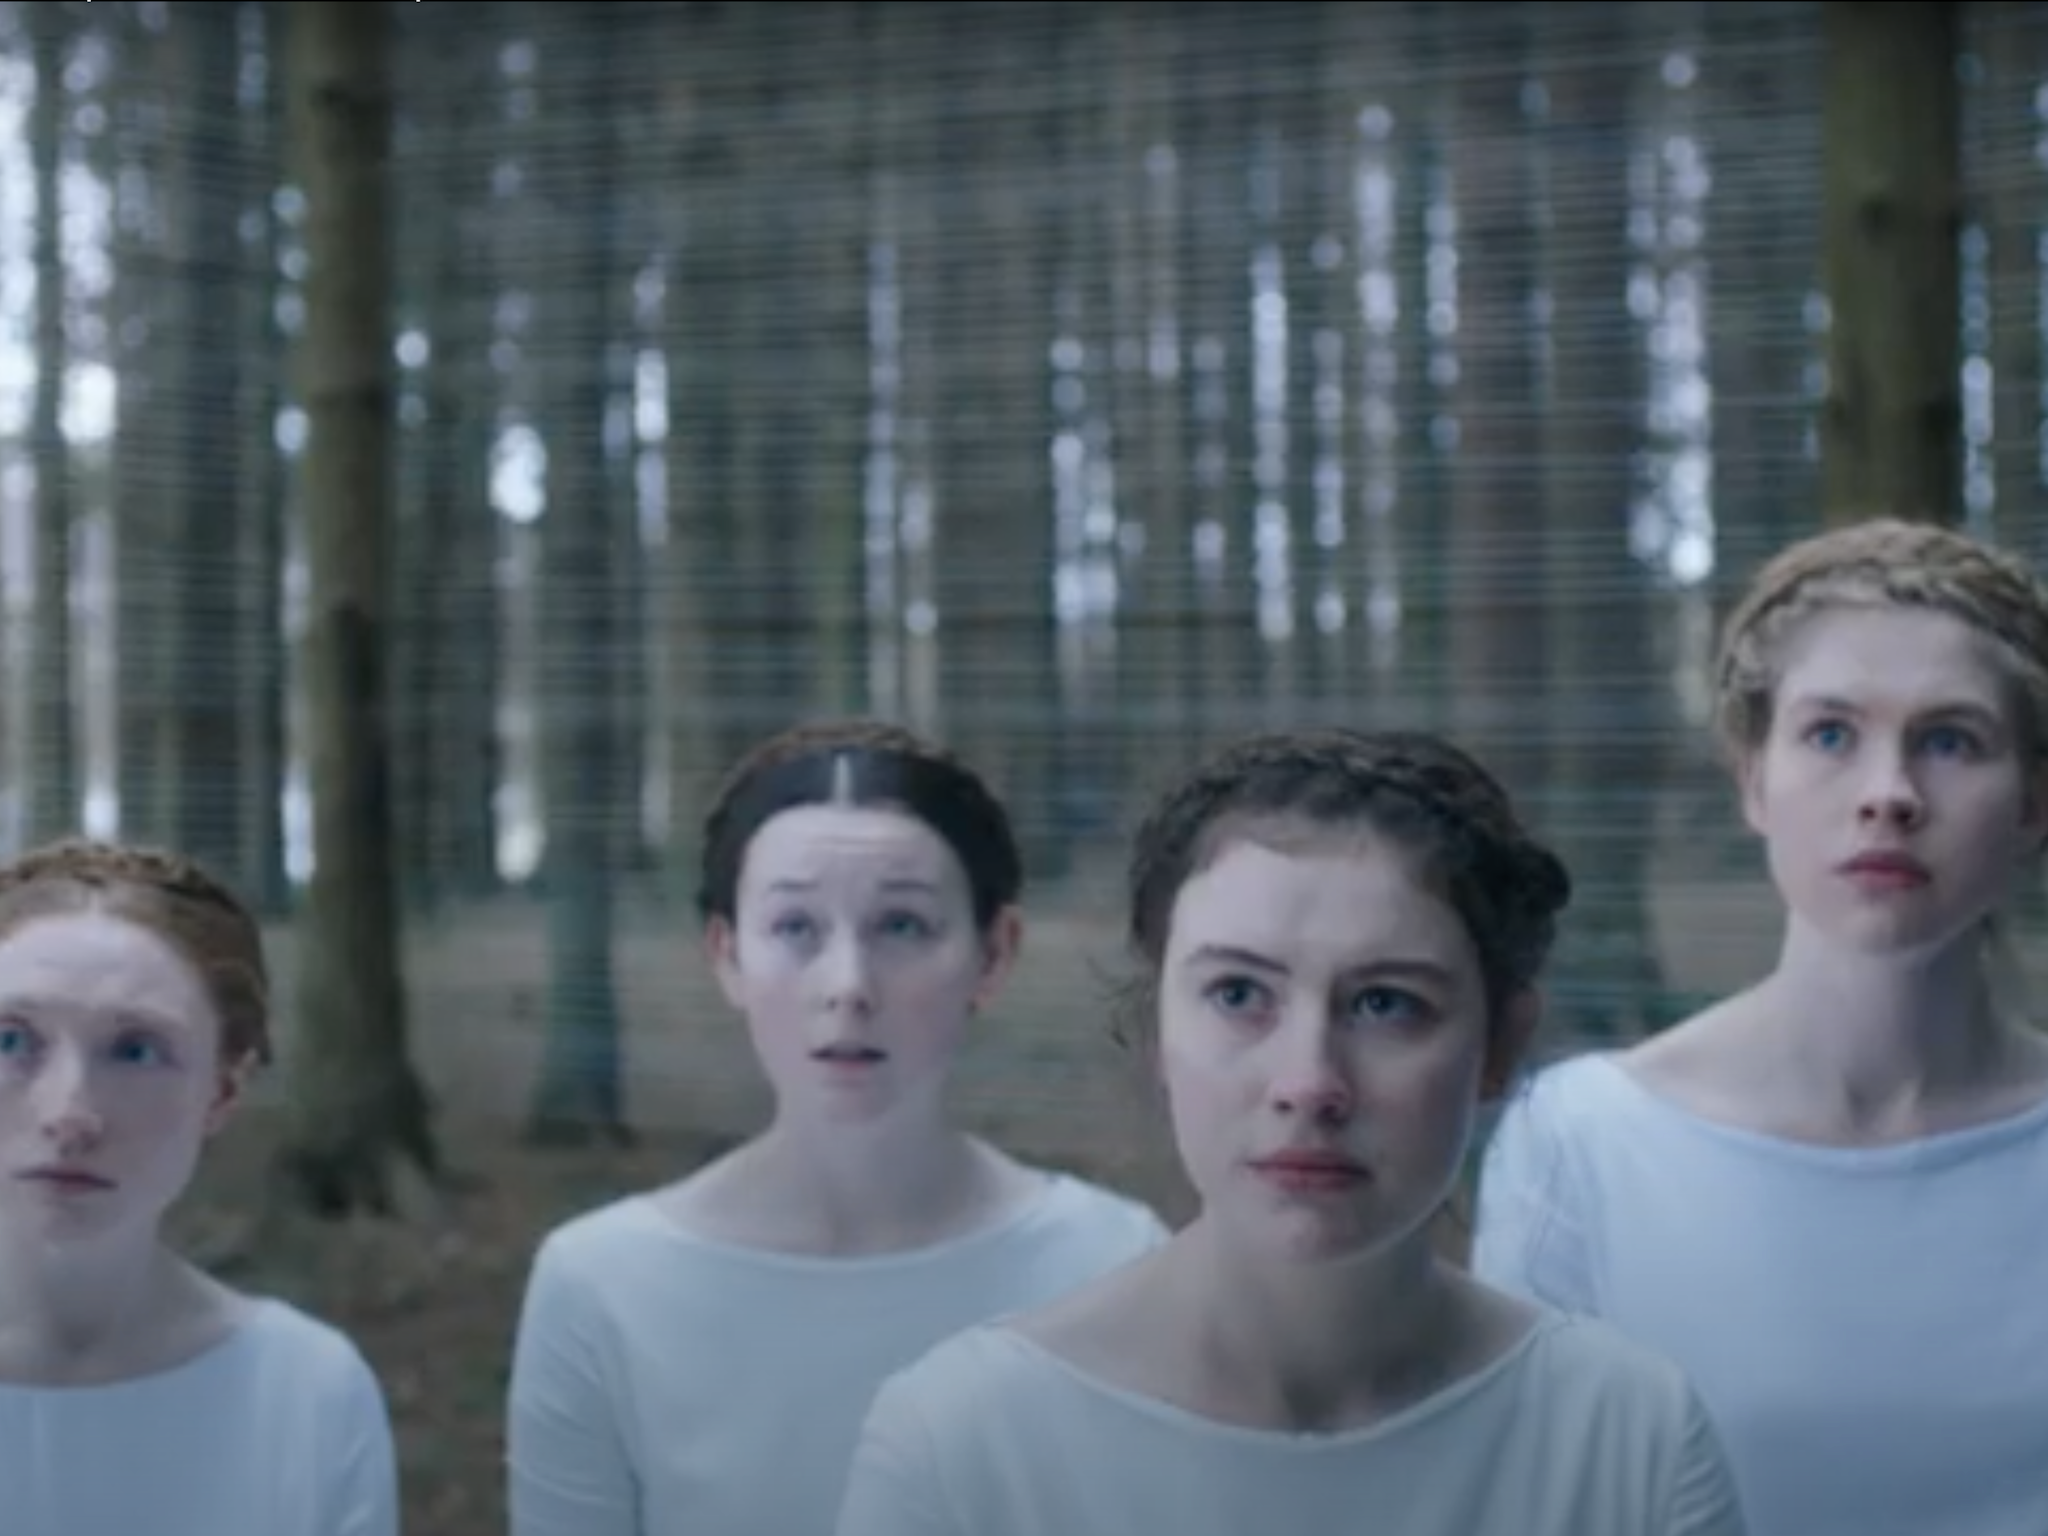 ‘The Other Lamb’ has been compared to Ari Aster’s ‘Midsommar'